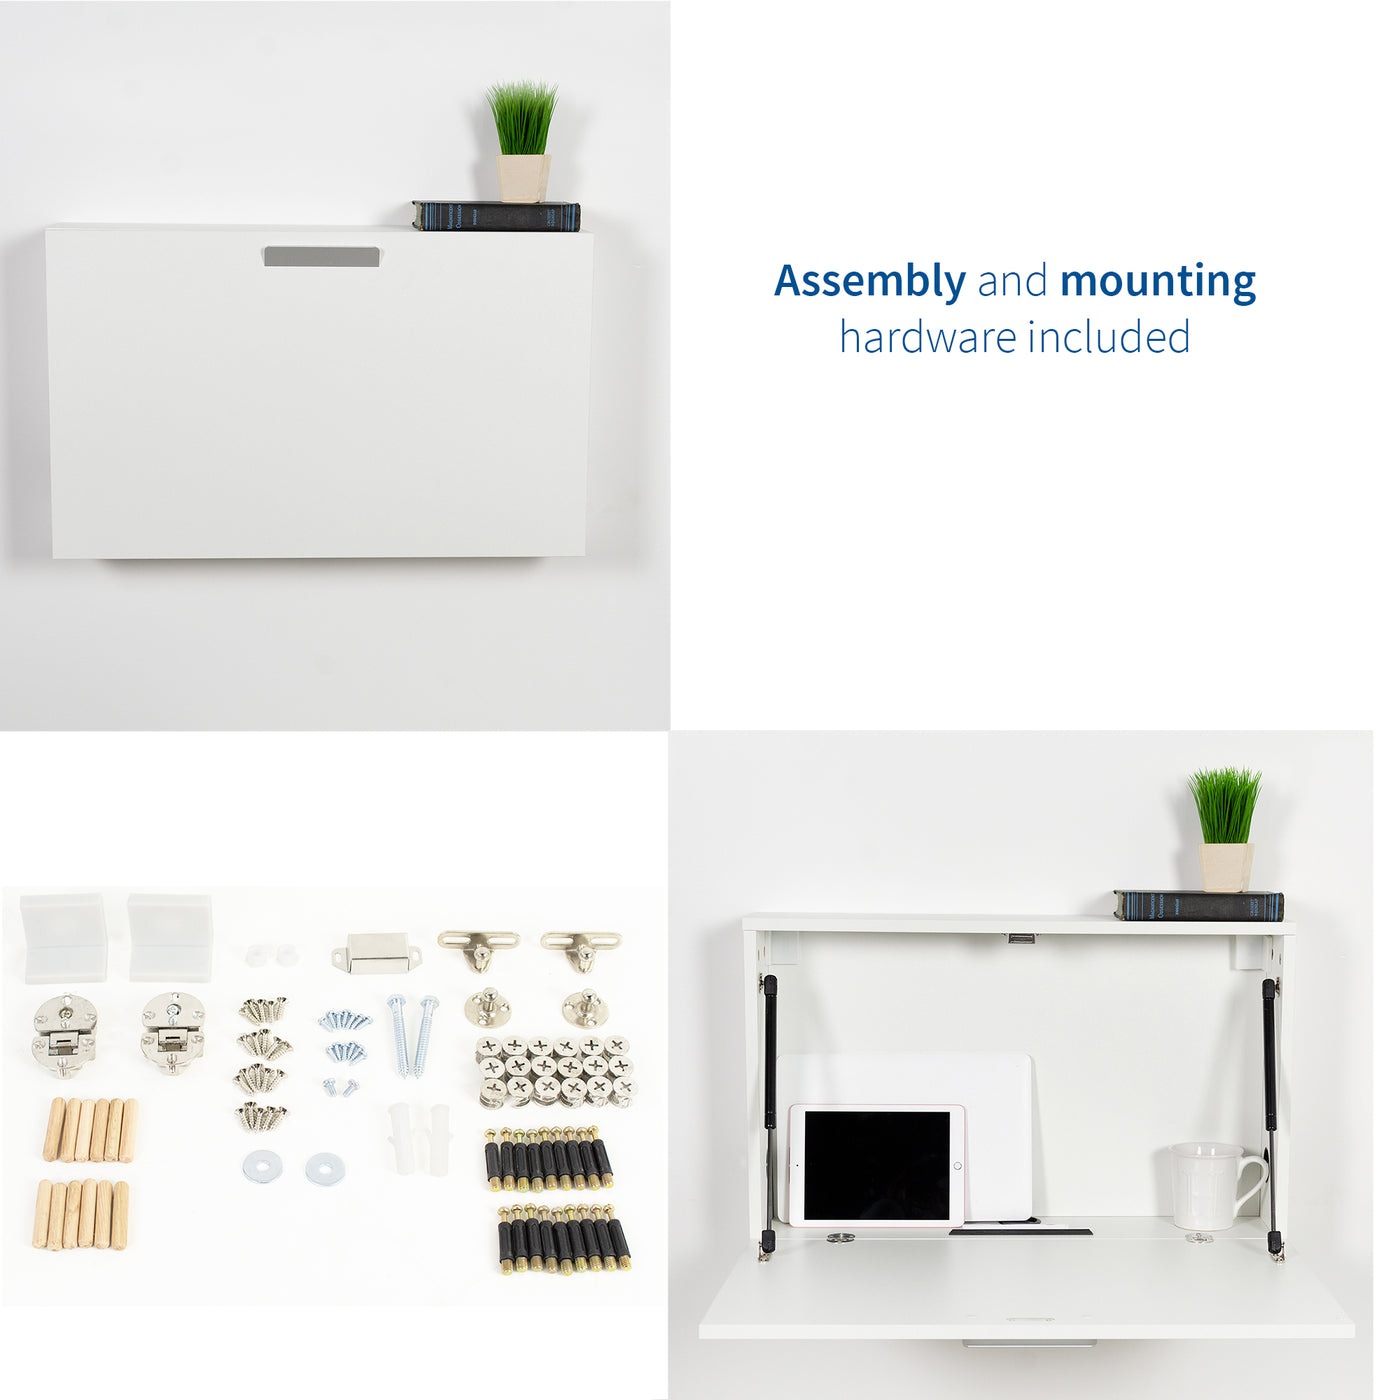 Convenient wall mount desk with easy assembly and hardware included.